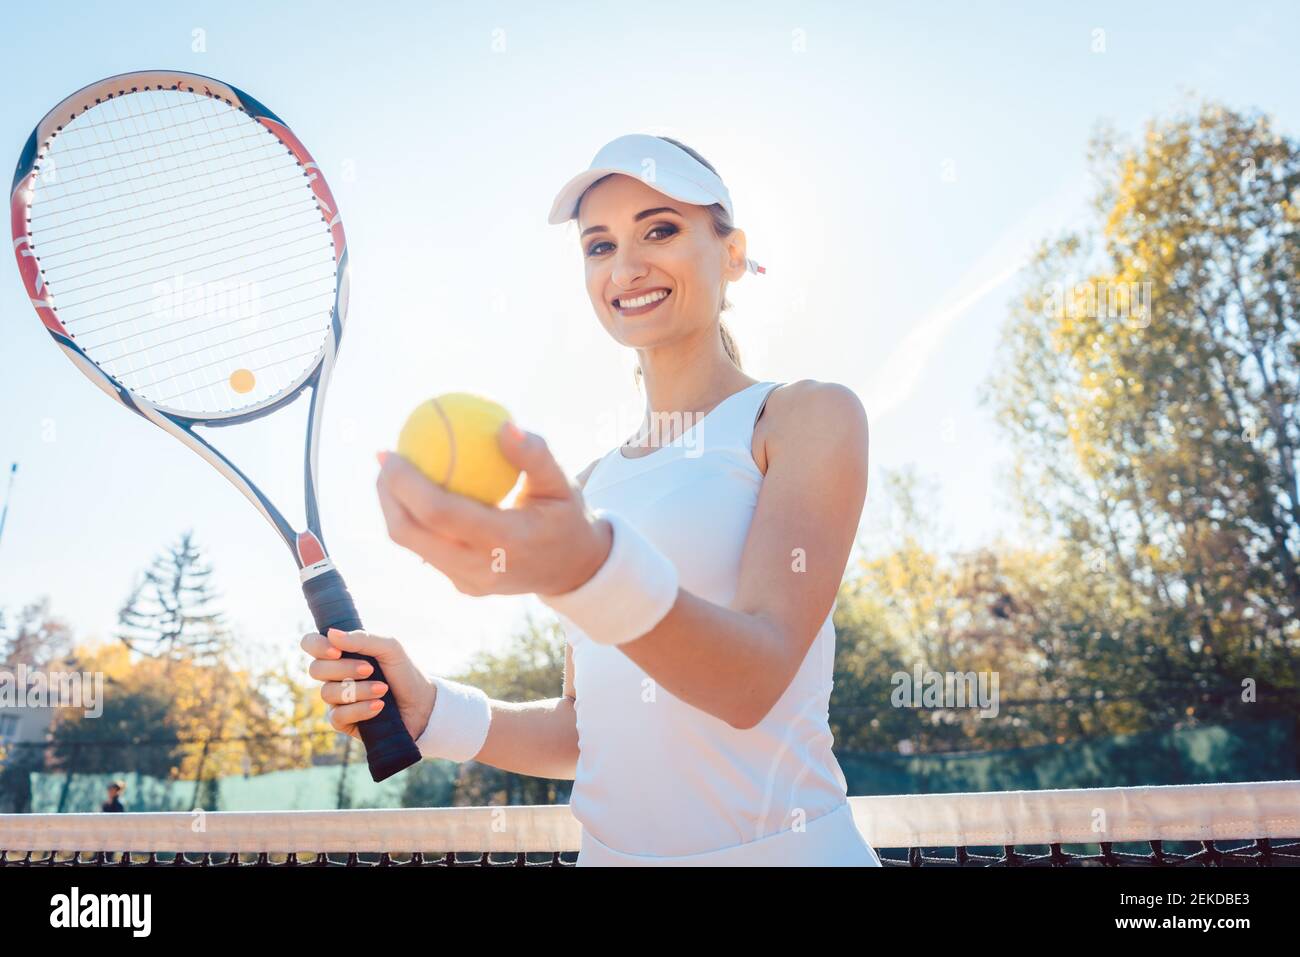 Beautiful woman getting ready to play tennis Stock Photo